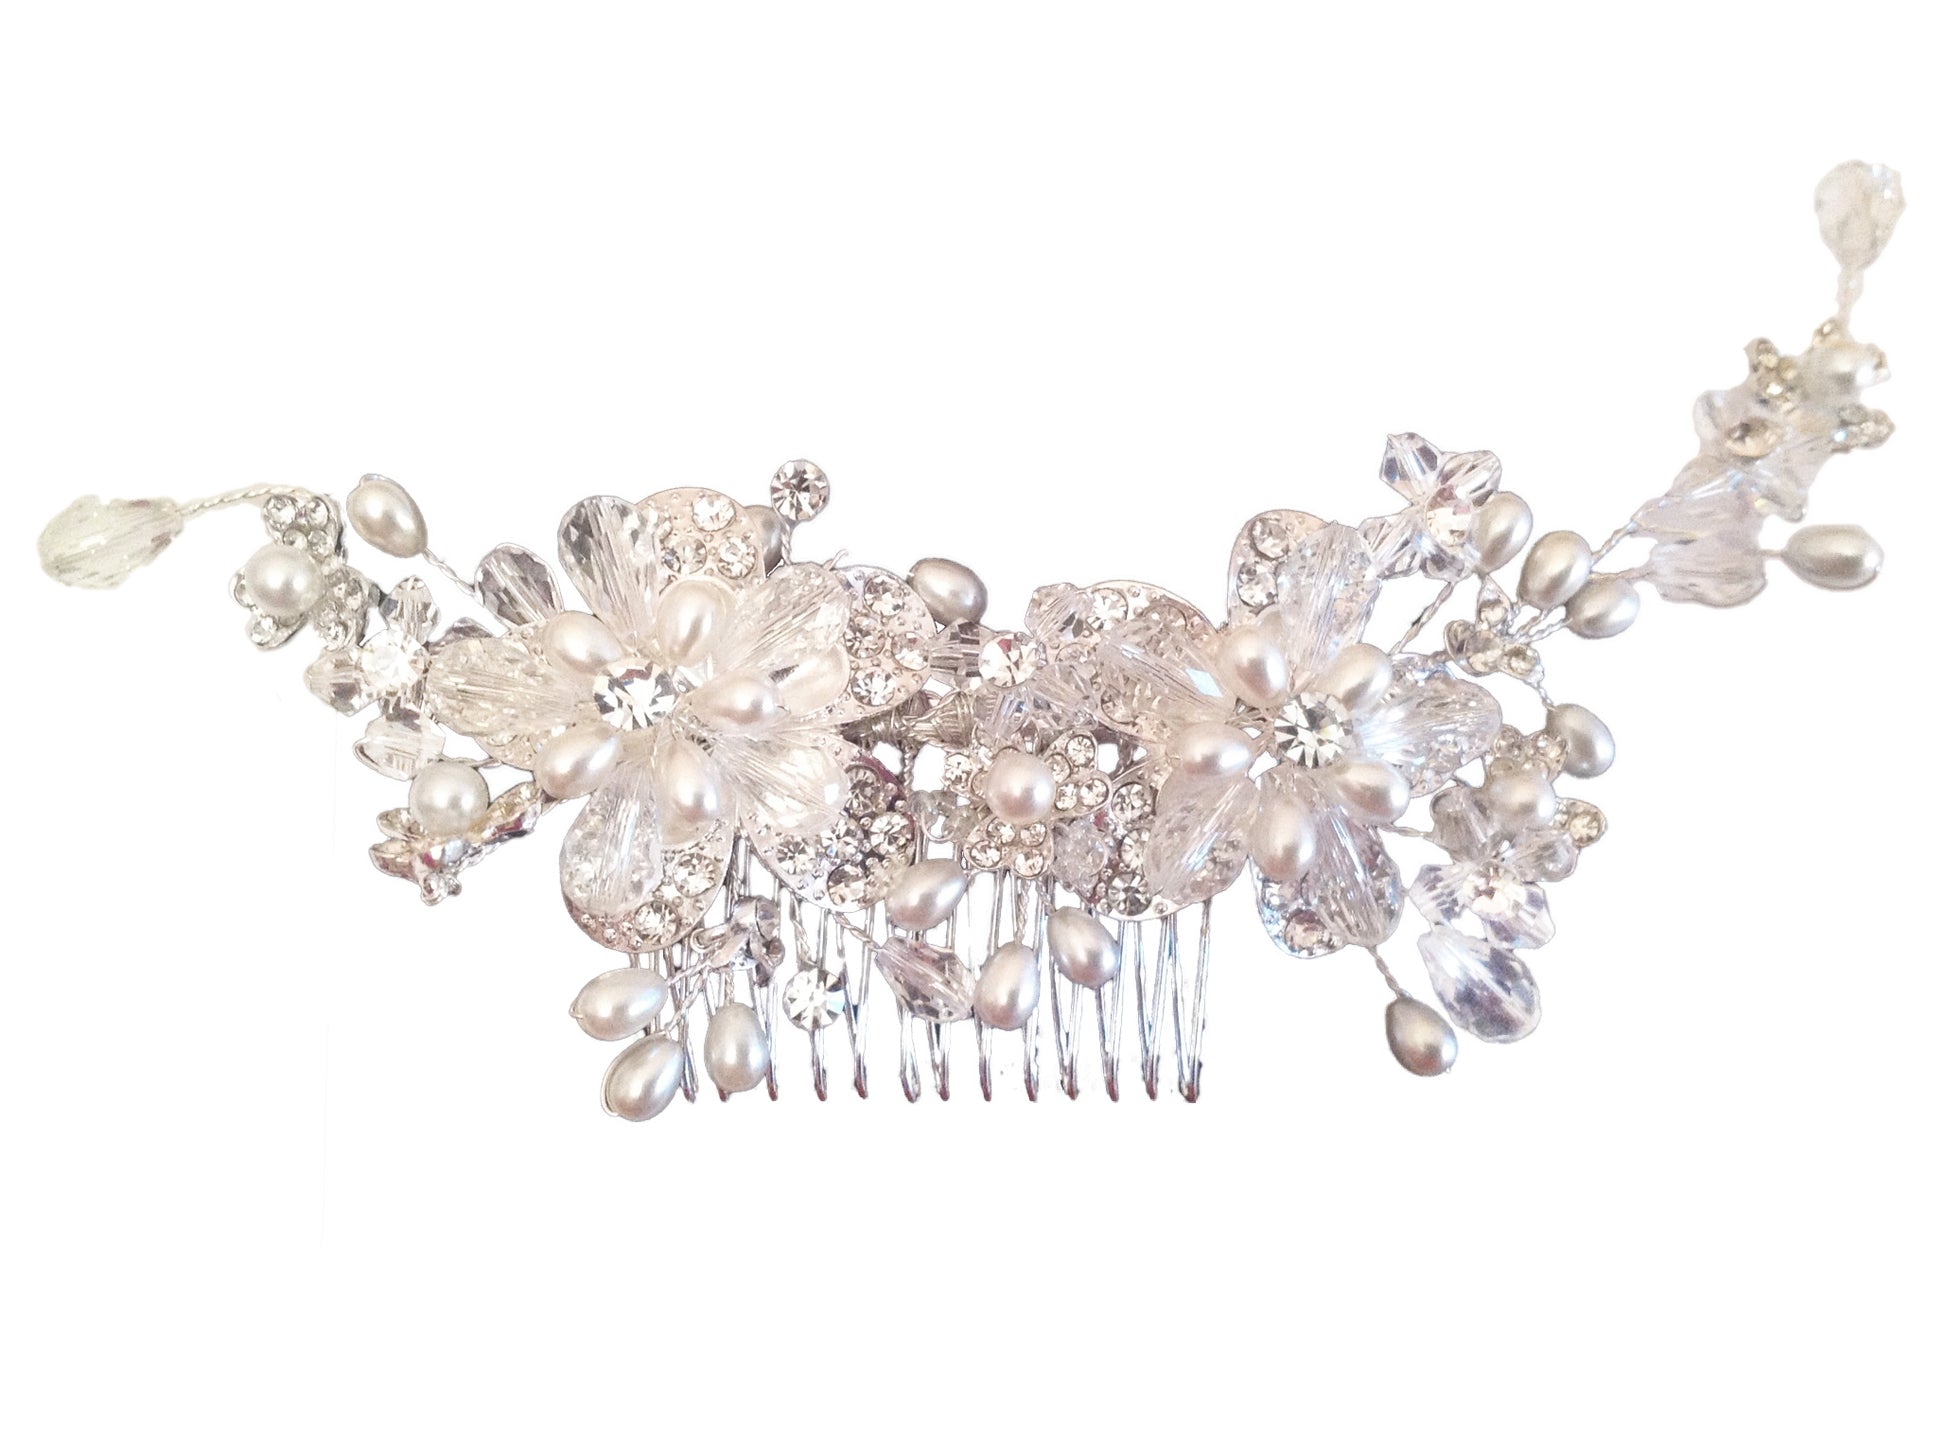 Premium Flower Hair Decoration, Feel like a Fairytale Princess with this breathtakingly beautiful hair comb decoration adorned with layers of sparkling Austrian crystal and hand-cut premium crystals in a floral design, enchanted with sprays of freshwater pearls entwined in crystal along a silver tone comb